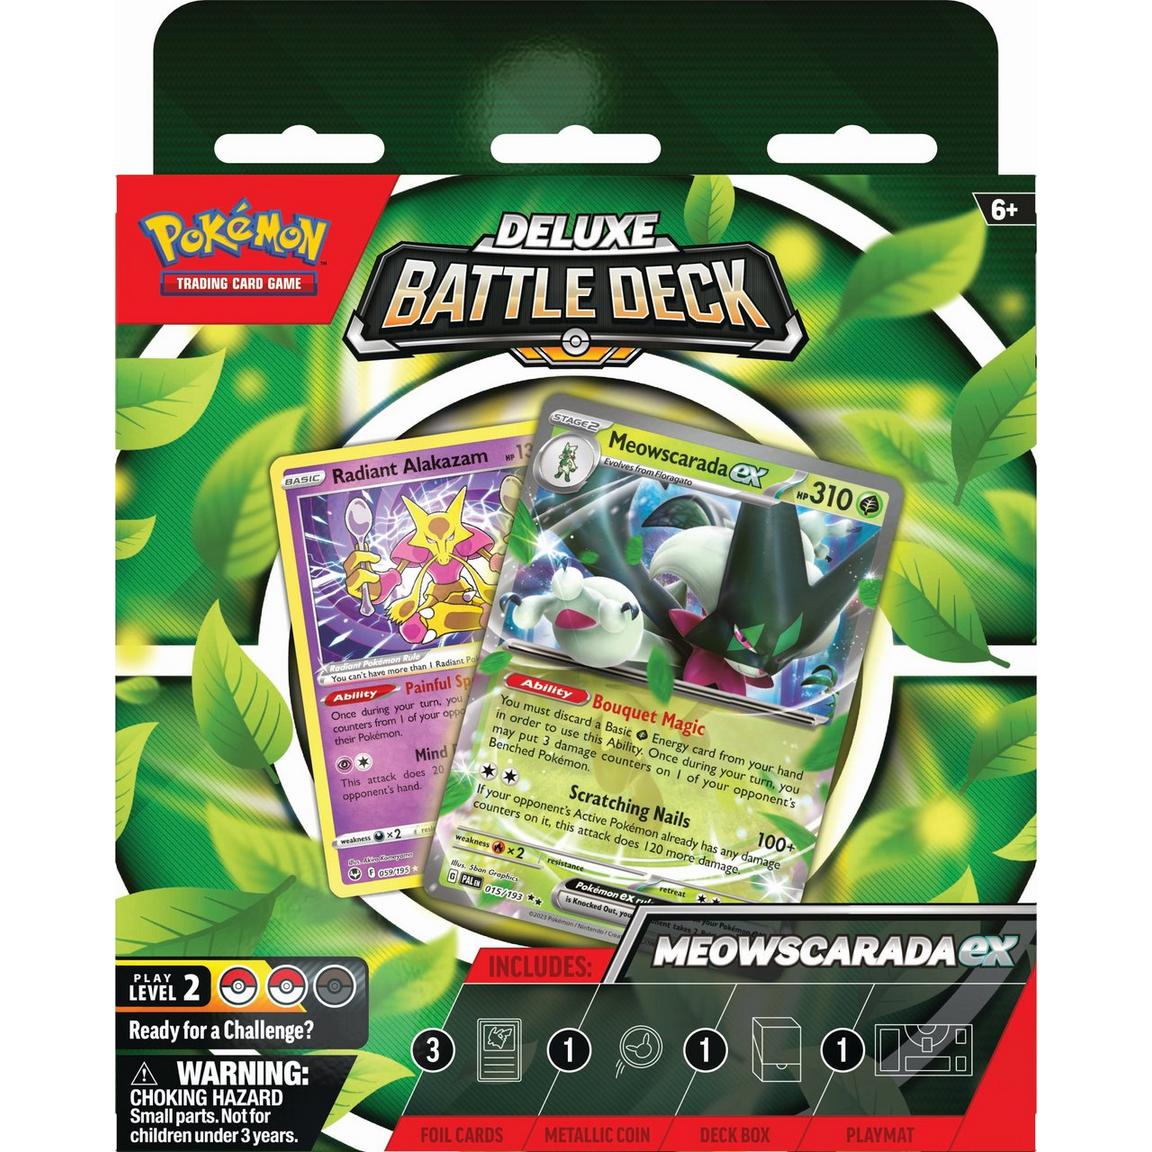 Pokemon Meowscarada ex Deluxe Battle Deck - Legacy Comics and Cards